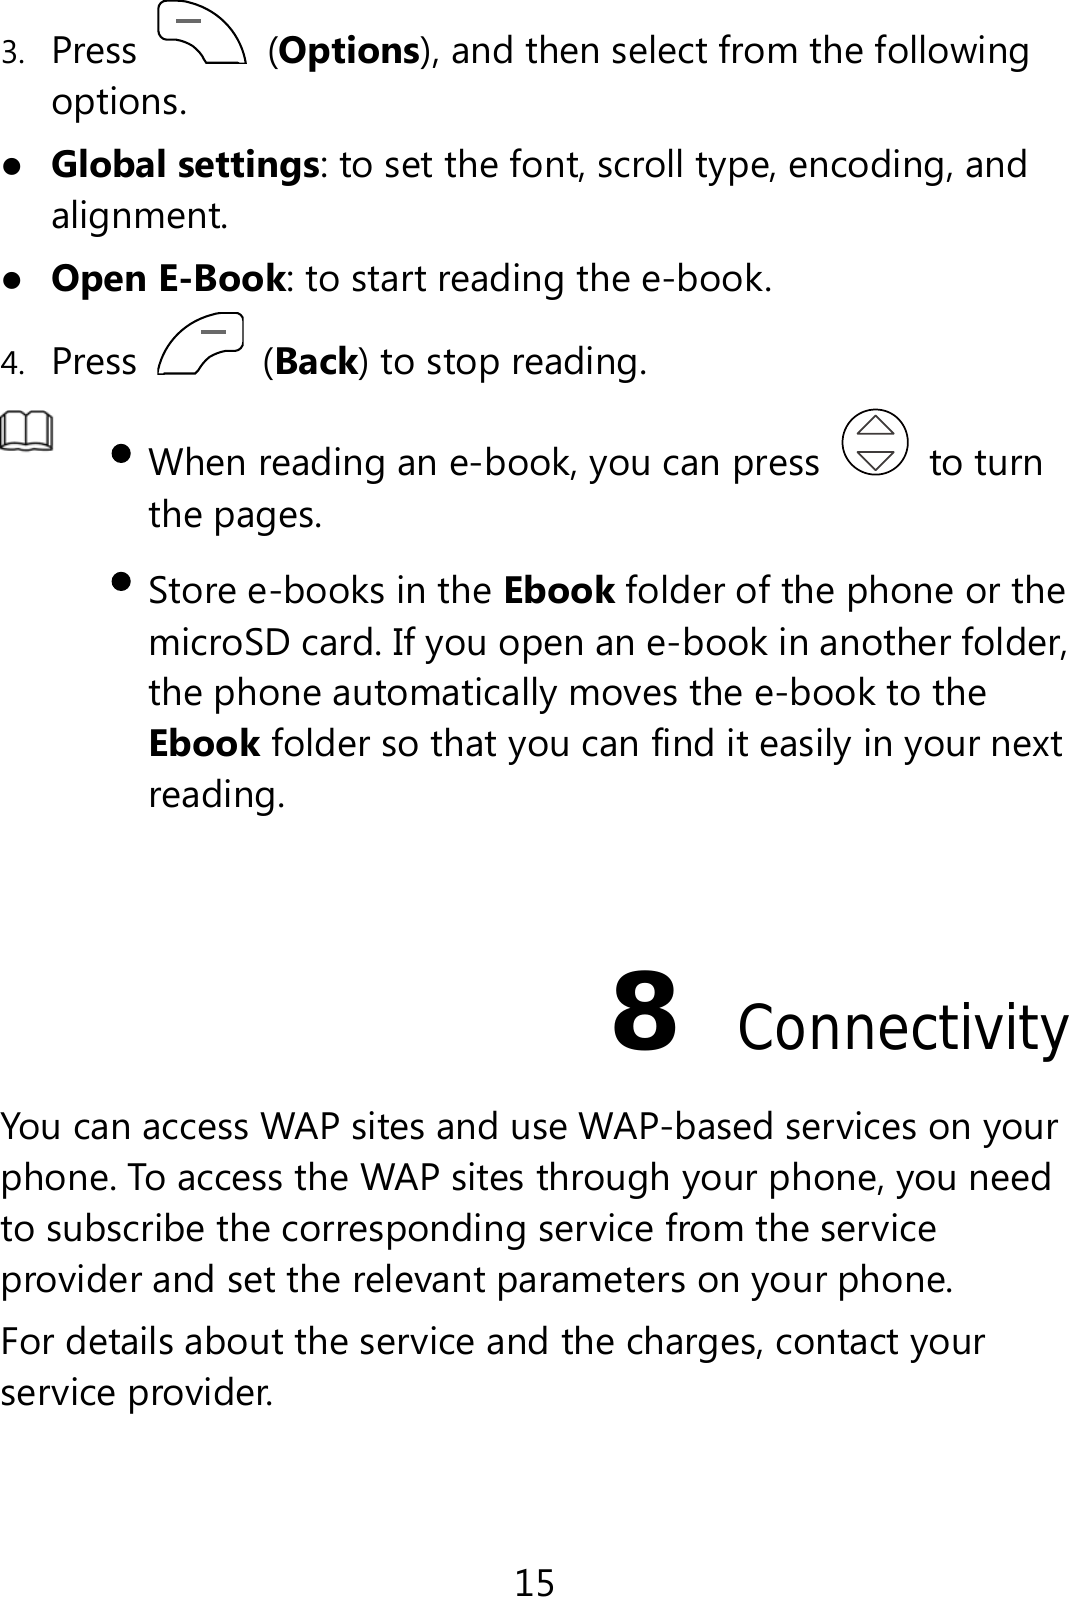 15 3. Press   (Options), and then select from the following options.  Global settings: to set the font, scroll type, encoding, and alignment.  Open E-Book: to start reading the e-book.   4. Press   (Back) to stop reading.     When reading an e-book, you can press   to turn the pages.    Store e-books in the Ebook folder of the phone or the microSD card. If you open an e-book in another folder, the phone automatically moves the e-book to the Ebook folder so that you can find it easily in your next reading.    8  Connectivity You can access WAP sites and use WAP-based services on your phone. To access the WAP sites through your phone, you need to subscribe the corresponding service from the service provider and set the relevant parameters on your phone. For details about the service and the charges, contact your service provider. 